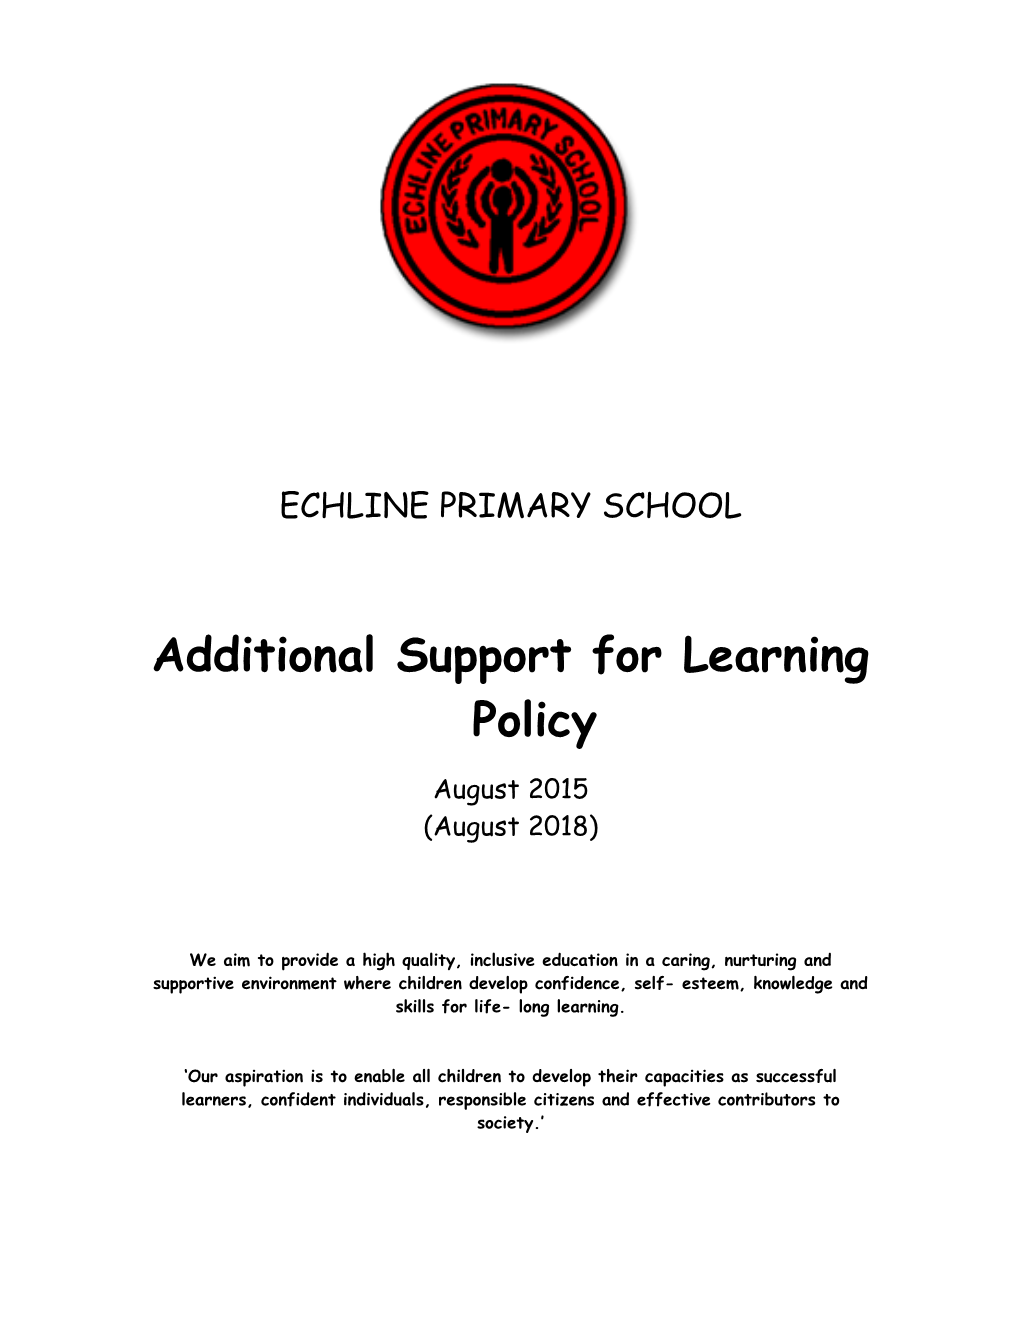 Additional Support for Learning Policy